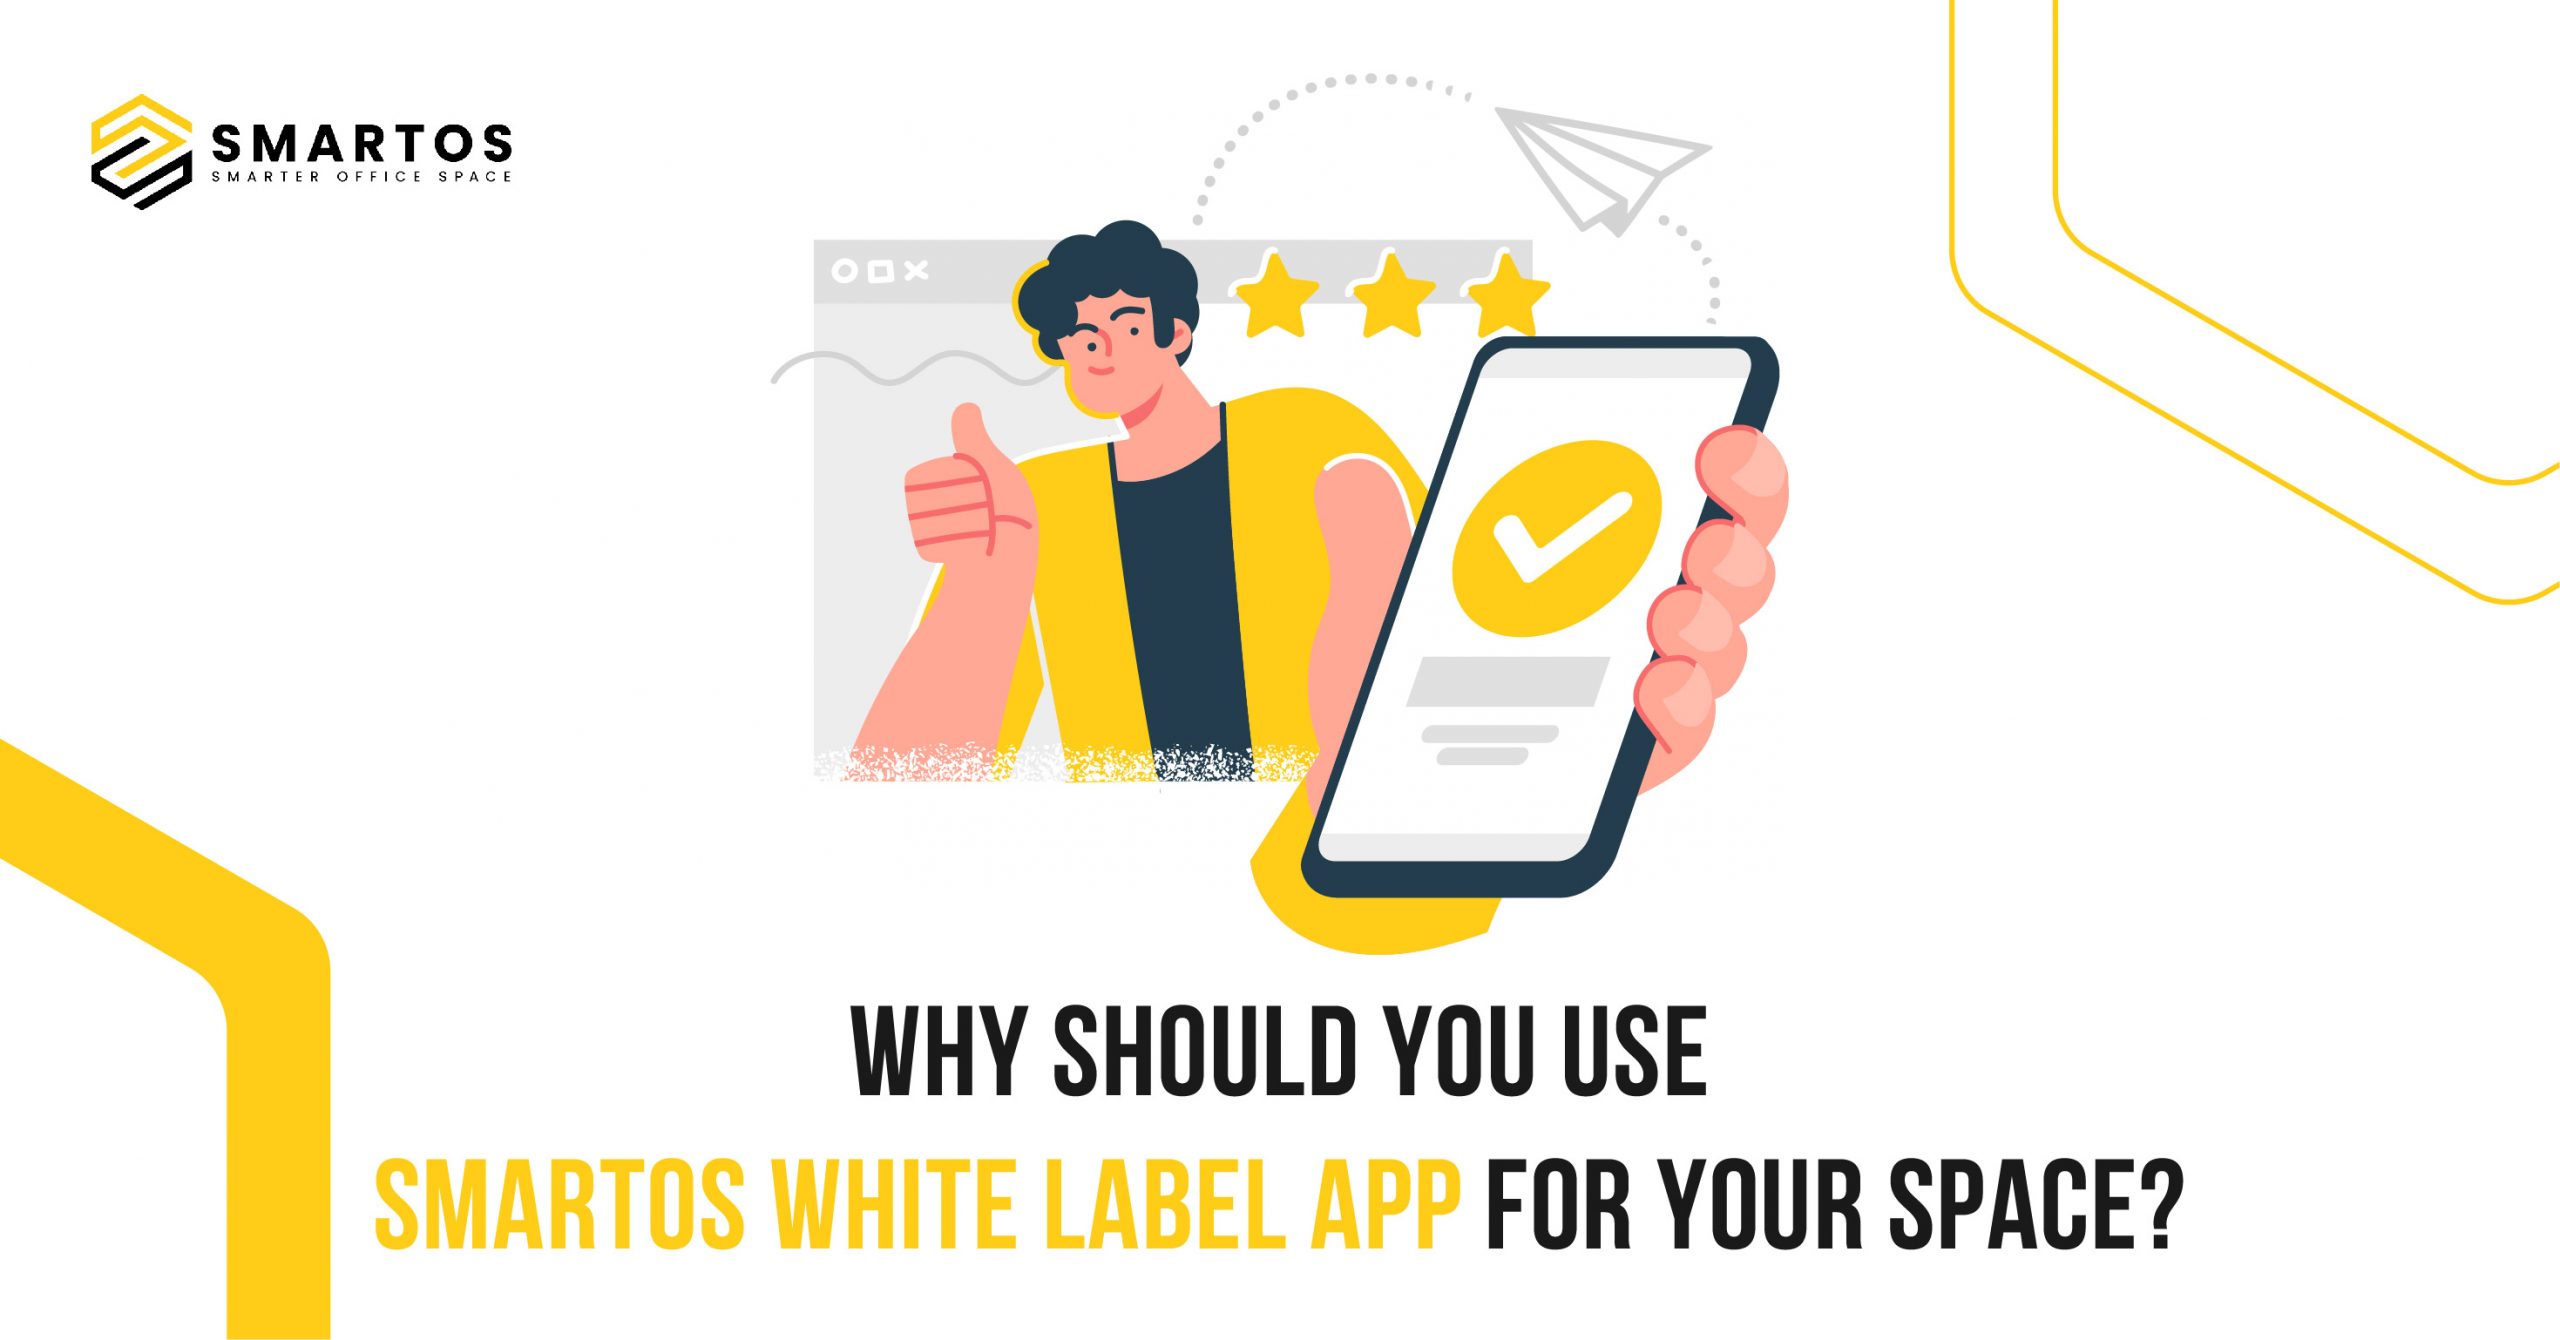 Why should you use Smartos white label app for your space?